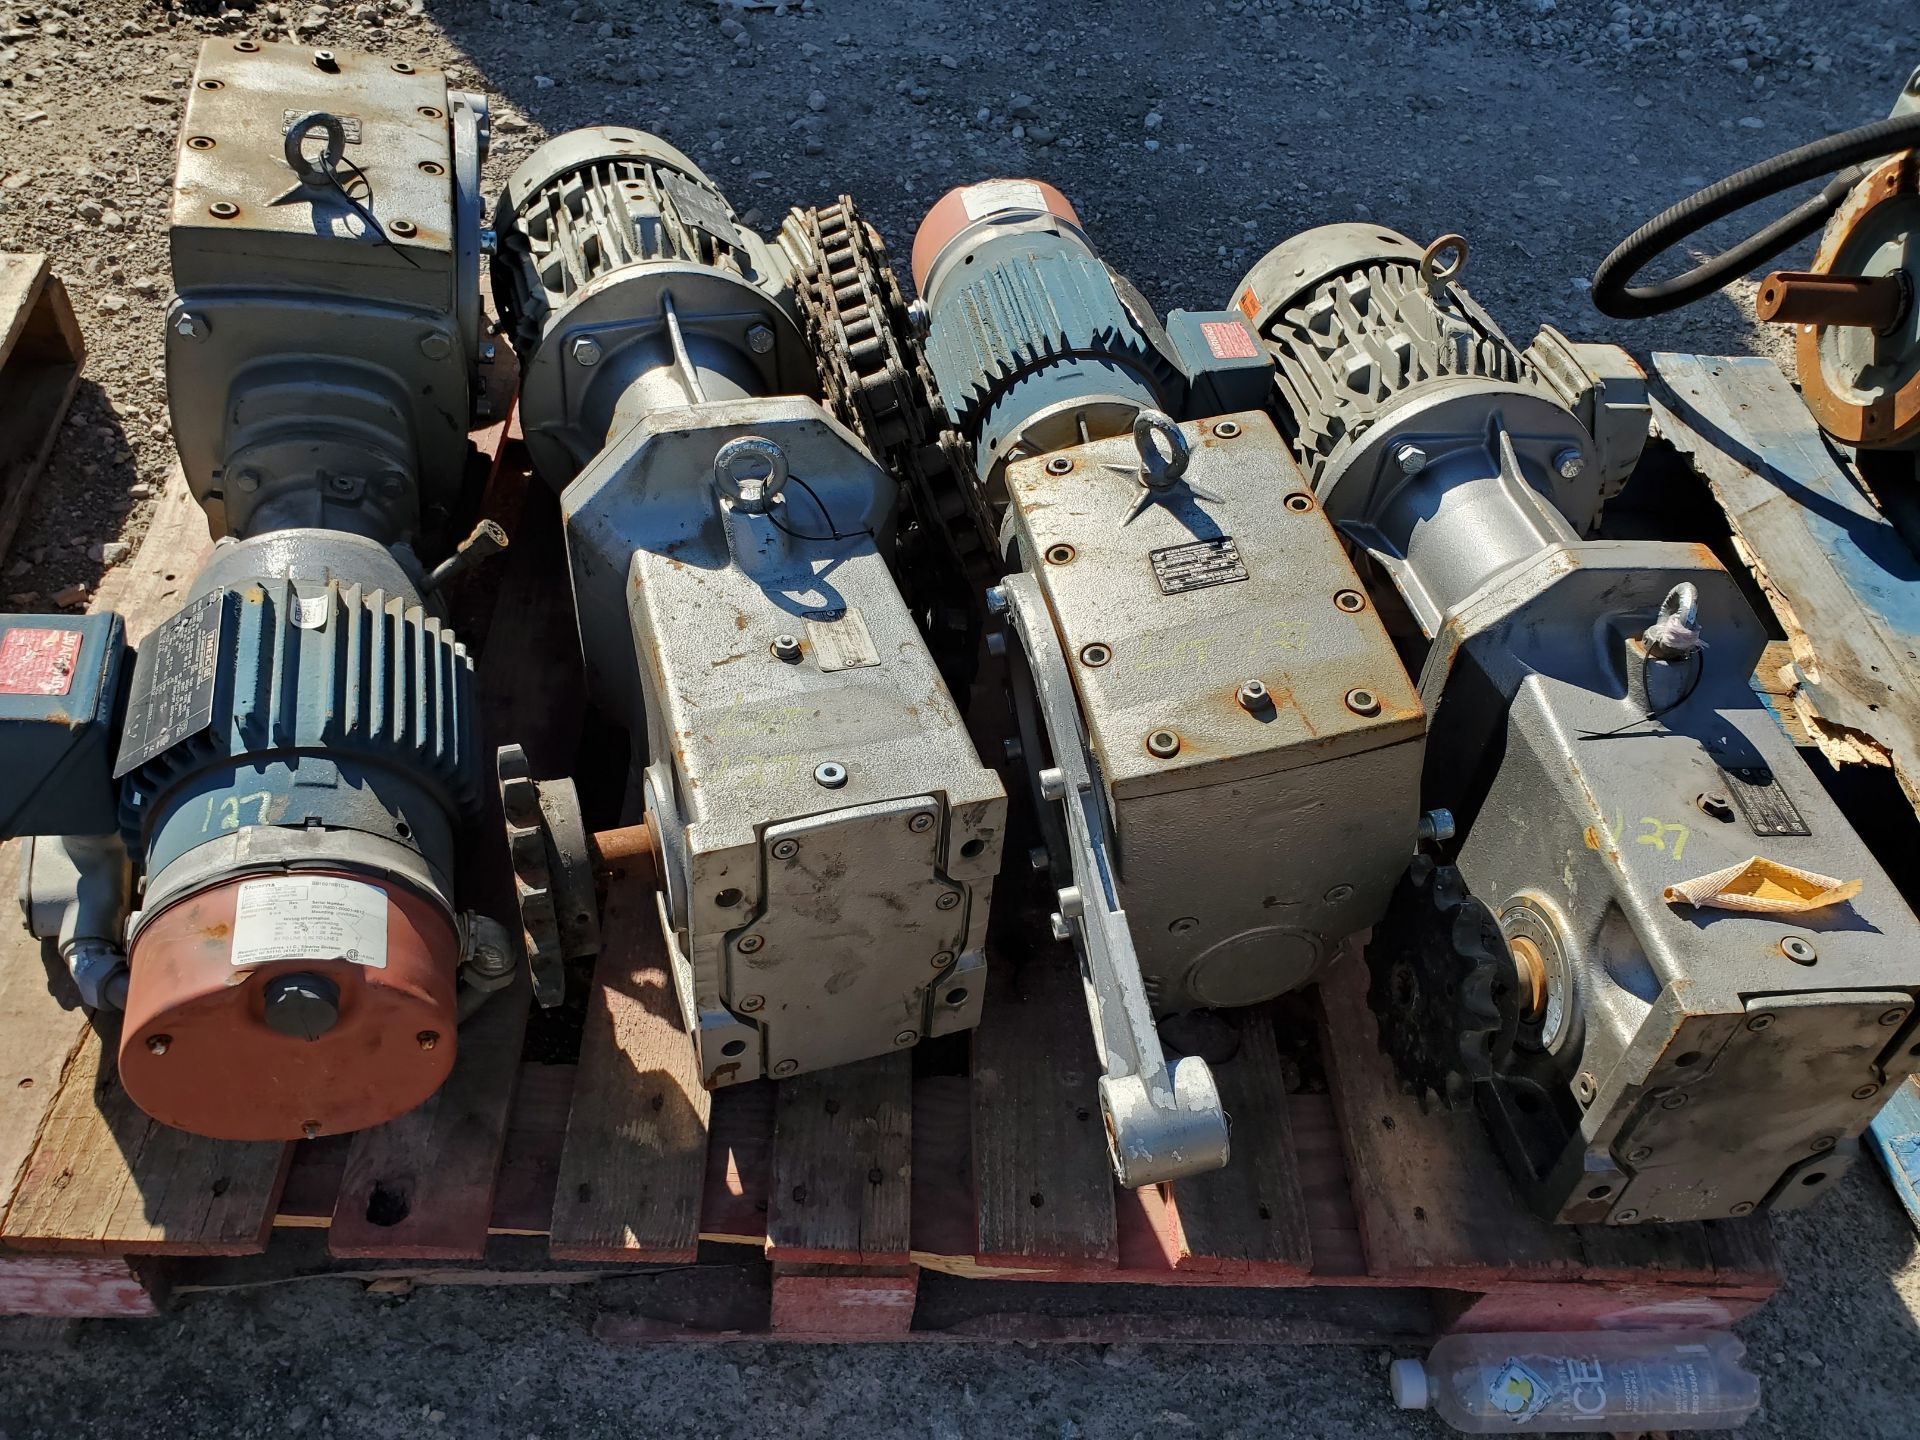 (4) NORD DRIVESYSTEMS 25.39:1 GEAR REDUCERS WITH GE 1 HP ELECTRIC MOTORS - Image 3 of 9